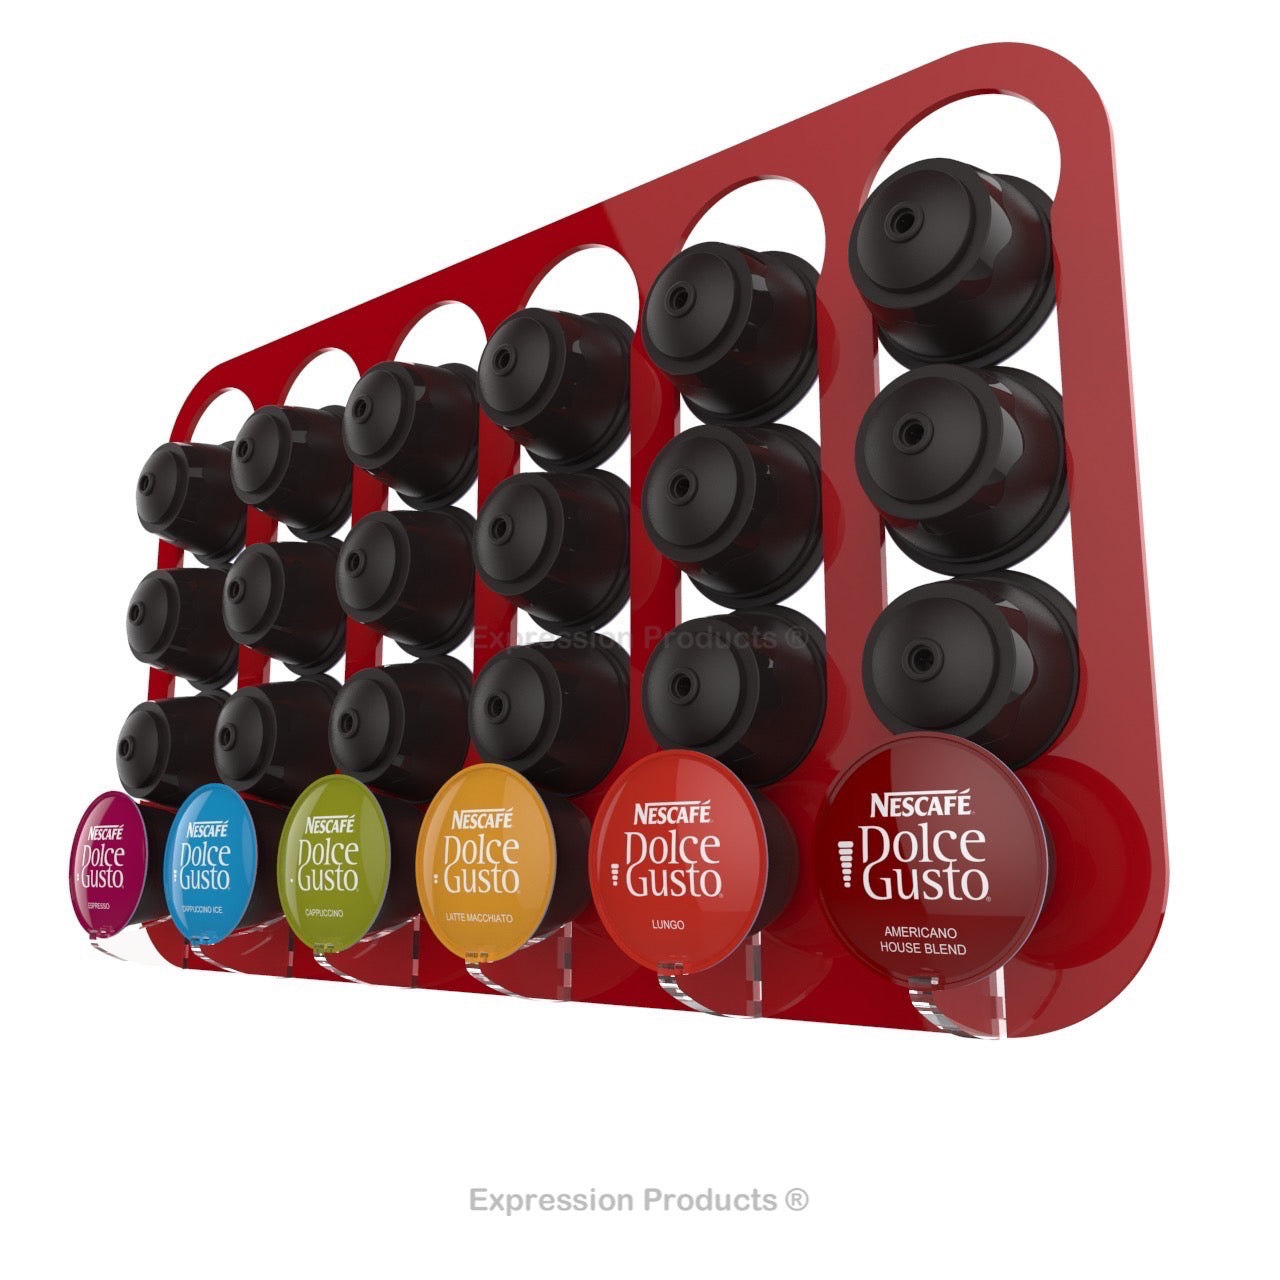 Dolce gusto coffee pod holder, wall mounted, half height.  Shown in red holding 24 pods